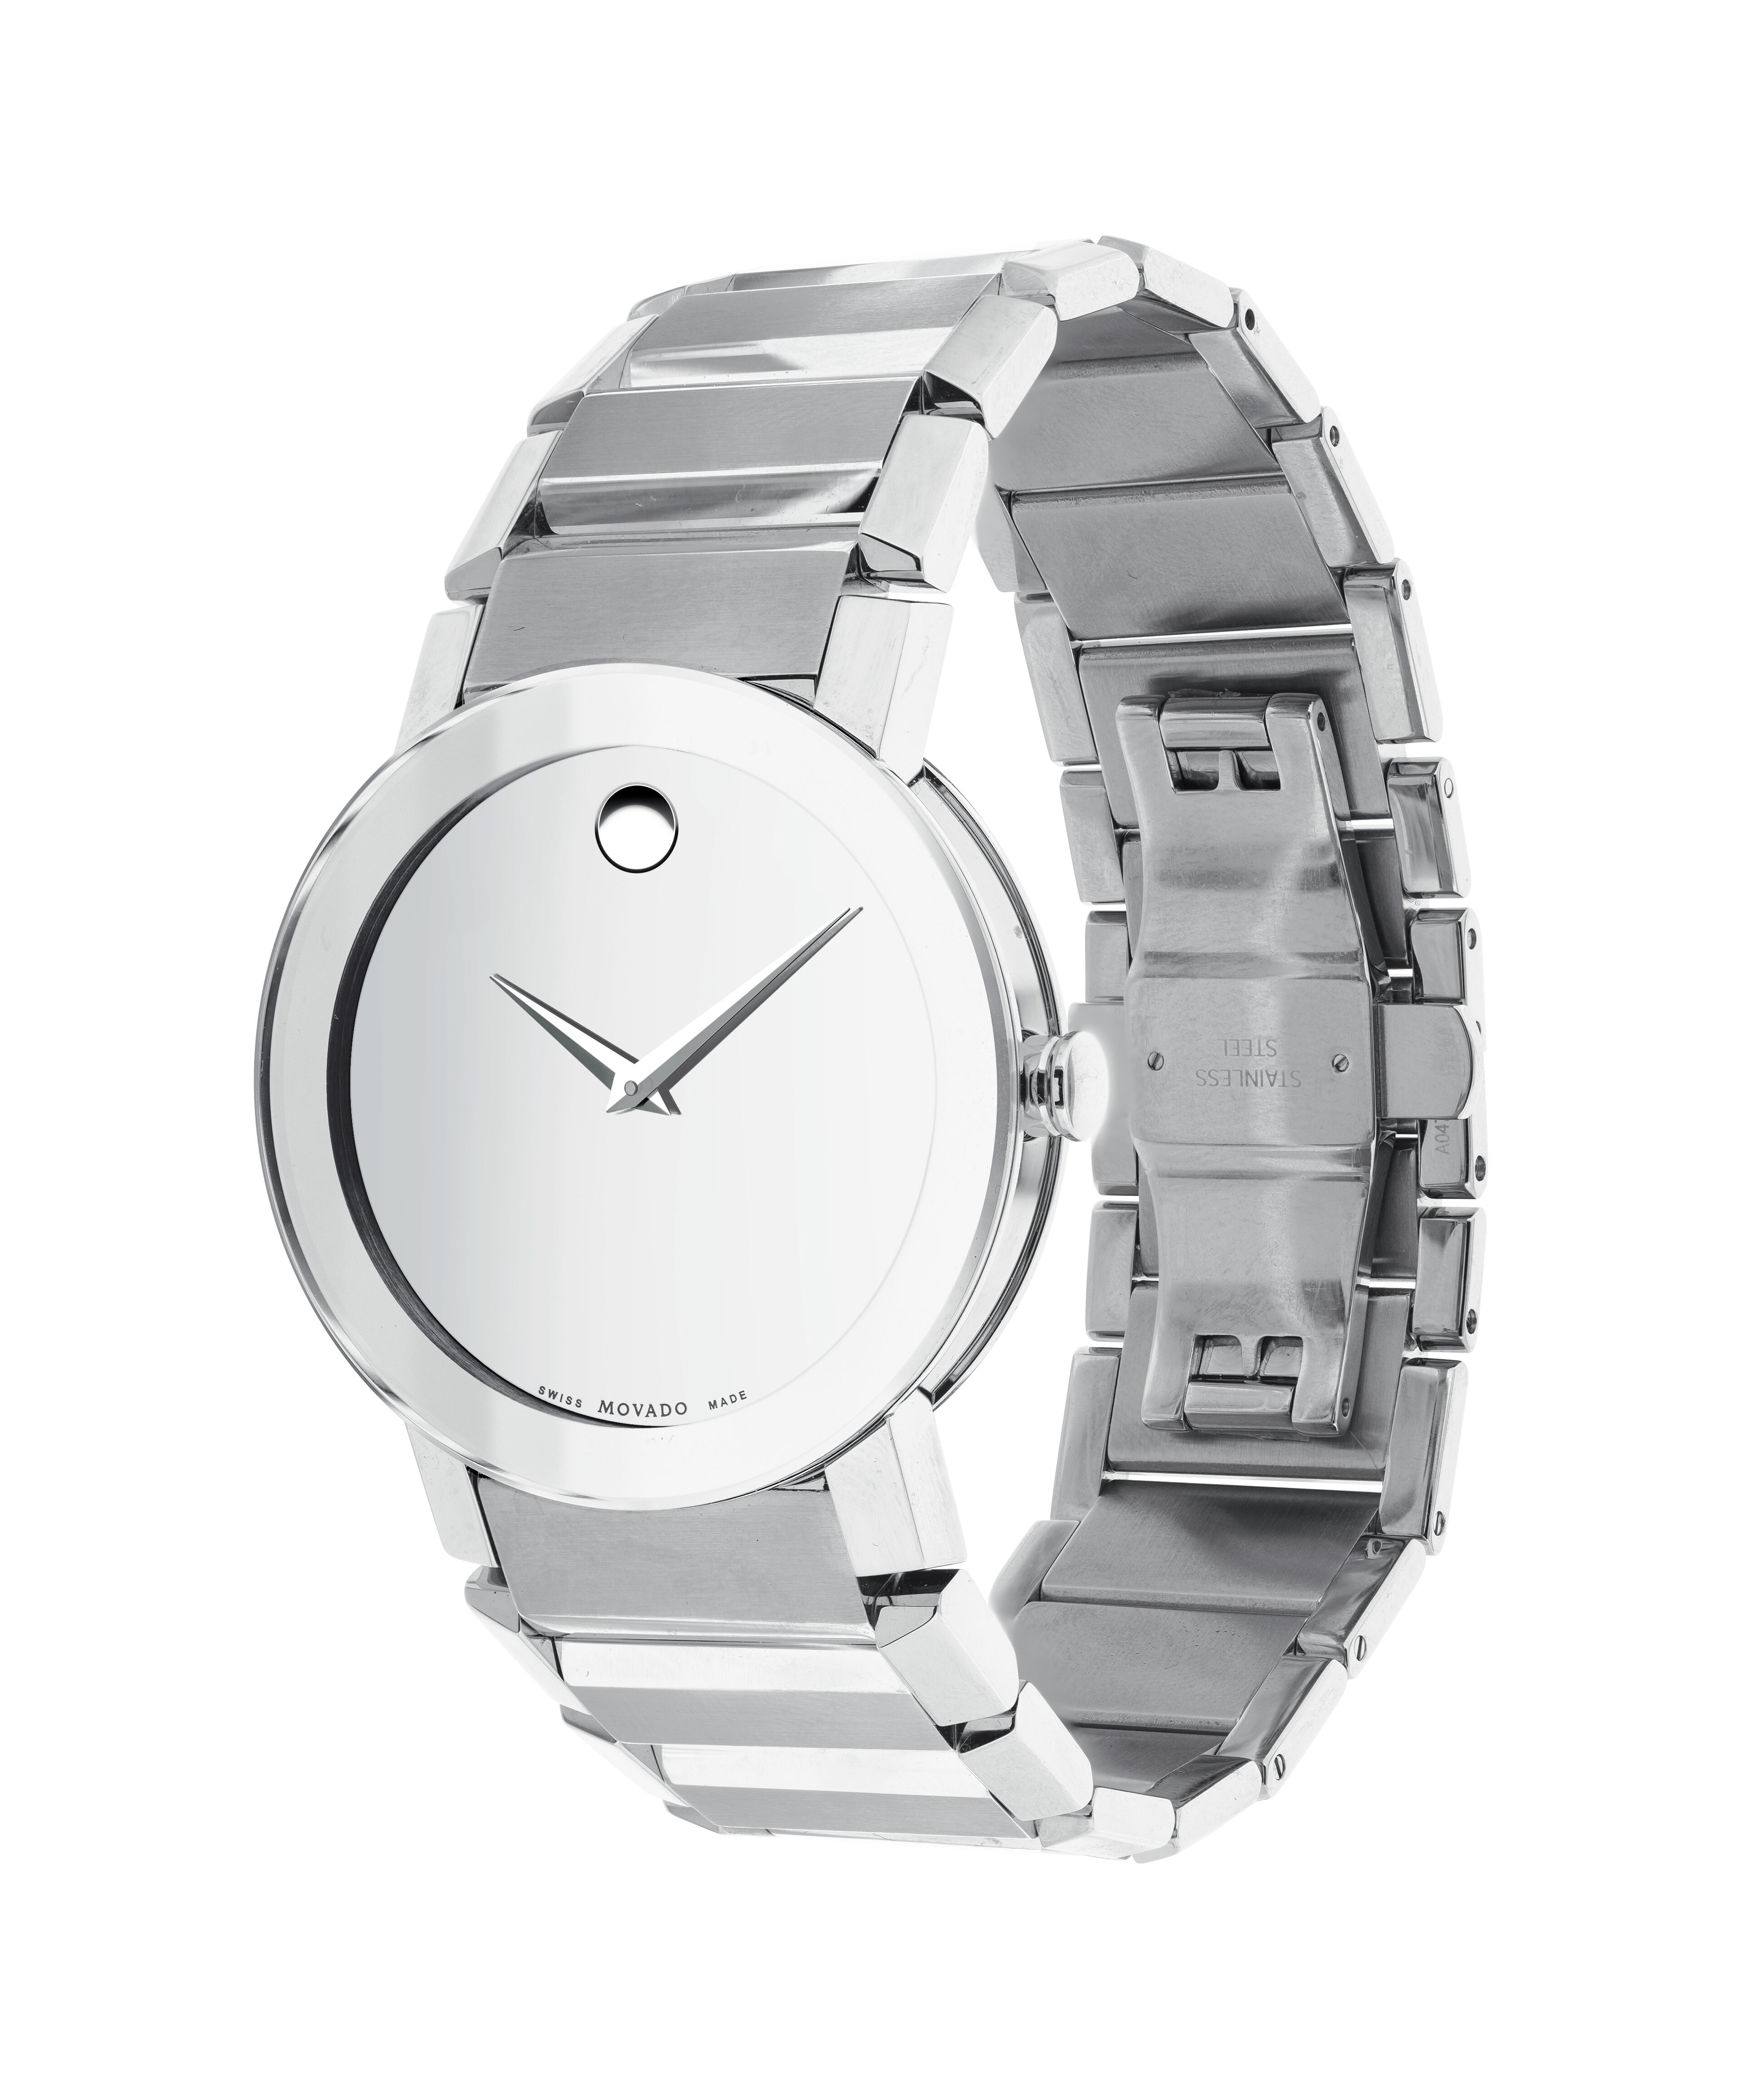 Movado Museum Ceramic 35mm. - White Dial - Ref. 87-49-871-1AMovado Museum Chronograph 0606792 44mm Stainless Steel Gray Dial Watch